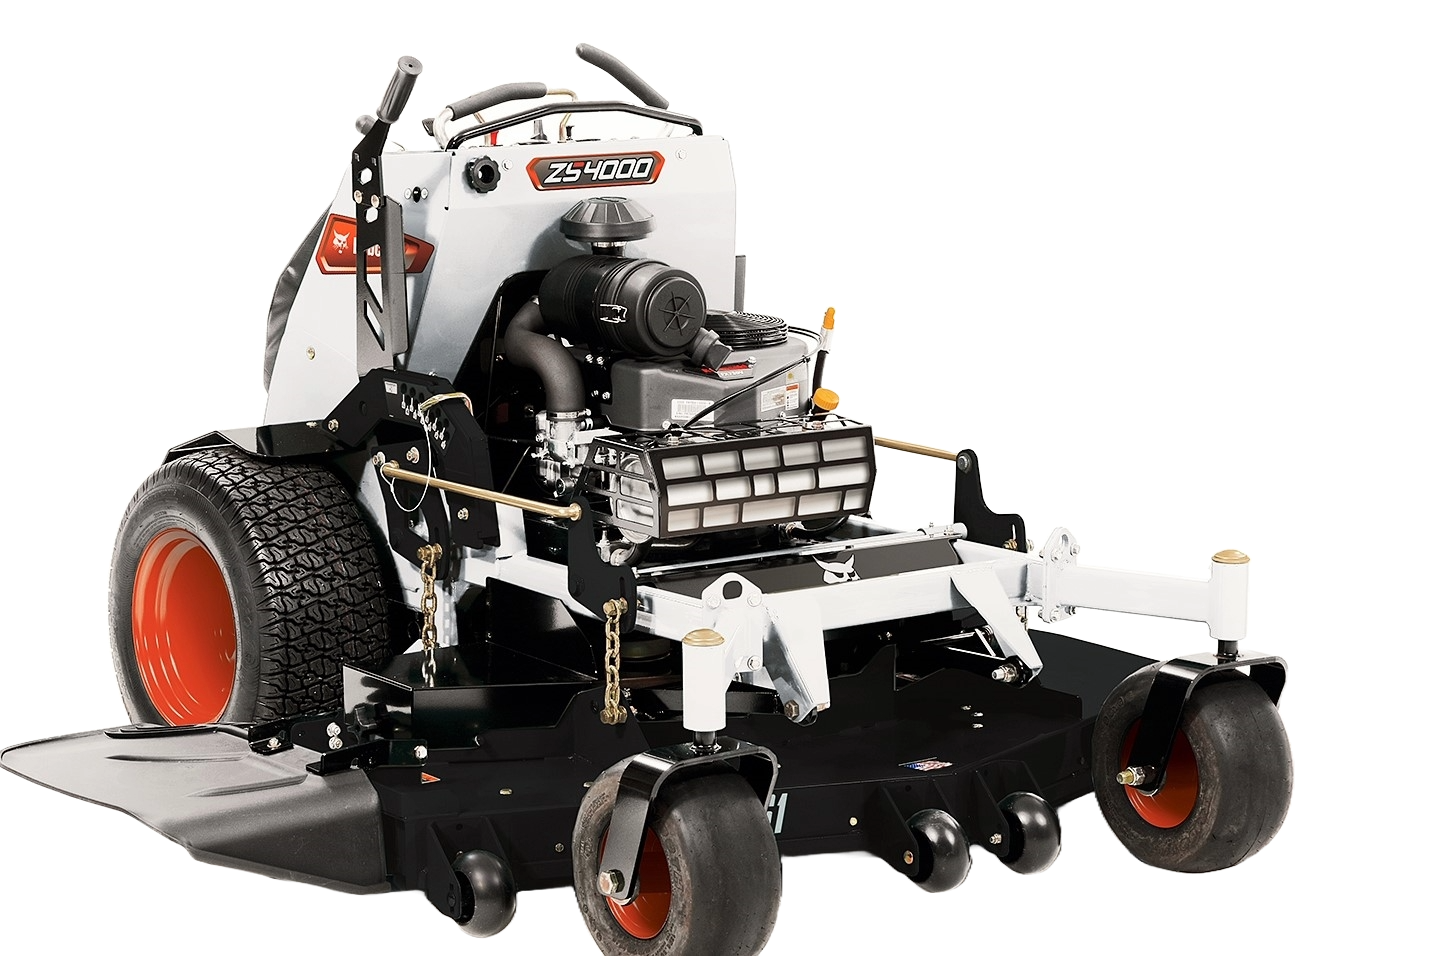 A white and black lawn mower is sitting on a white surface.